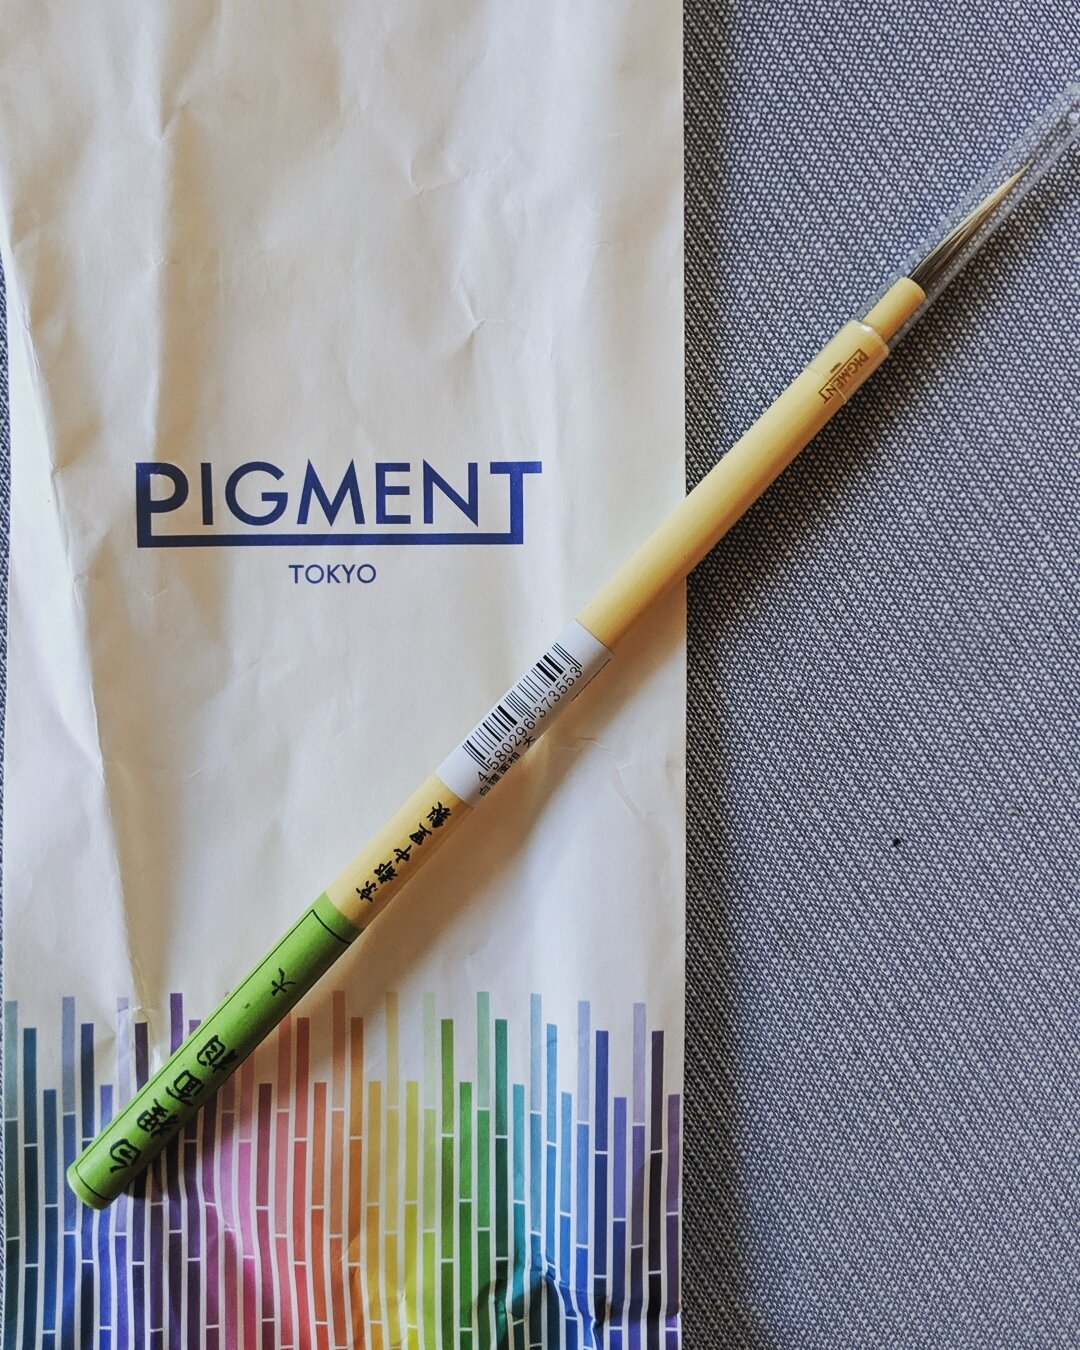 Been saving this liner. Can't wait to finally play. 
@pigment_tokyo #inkbrush #inkonpaper #staytuned